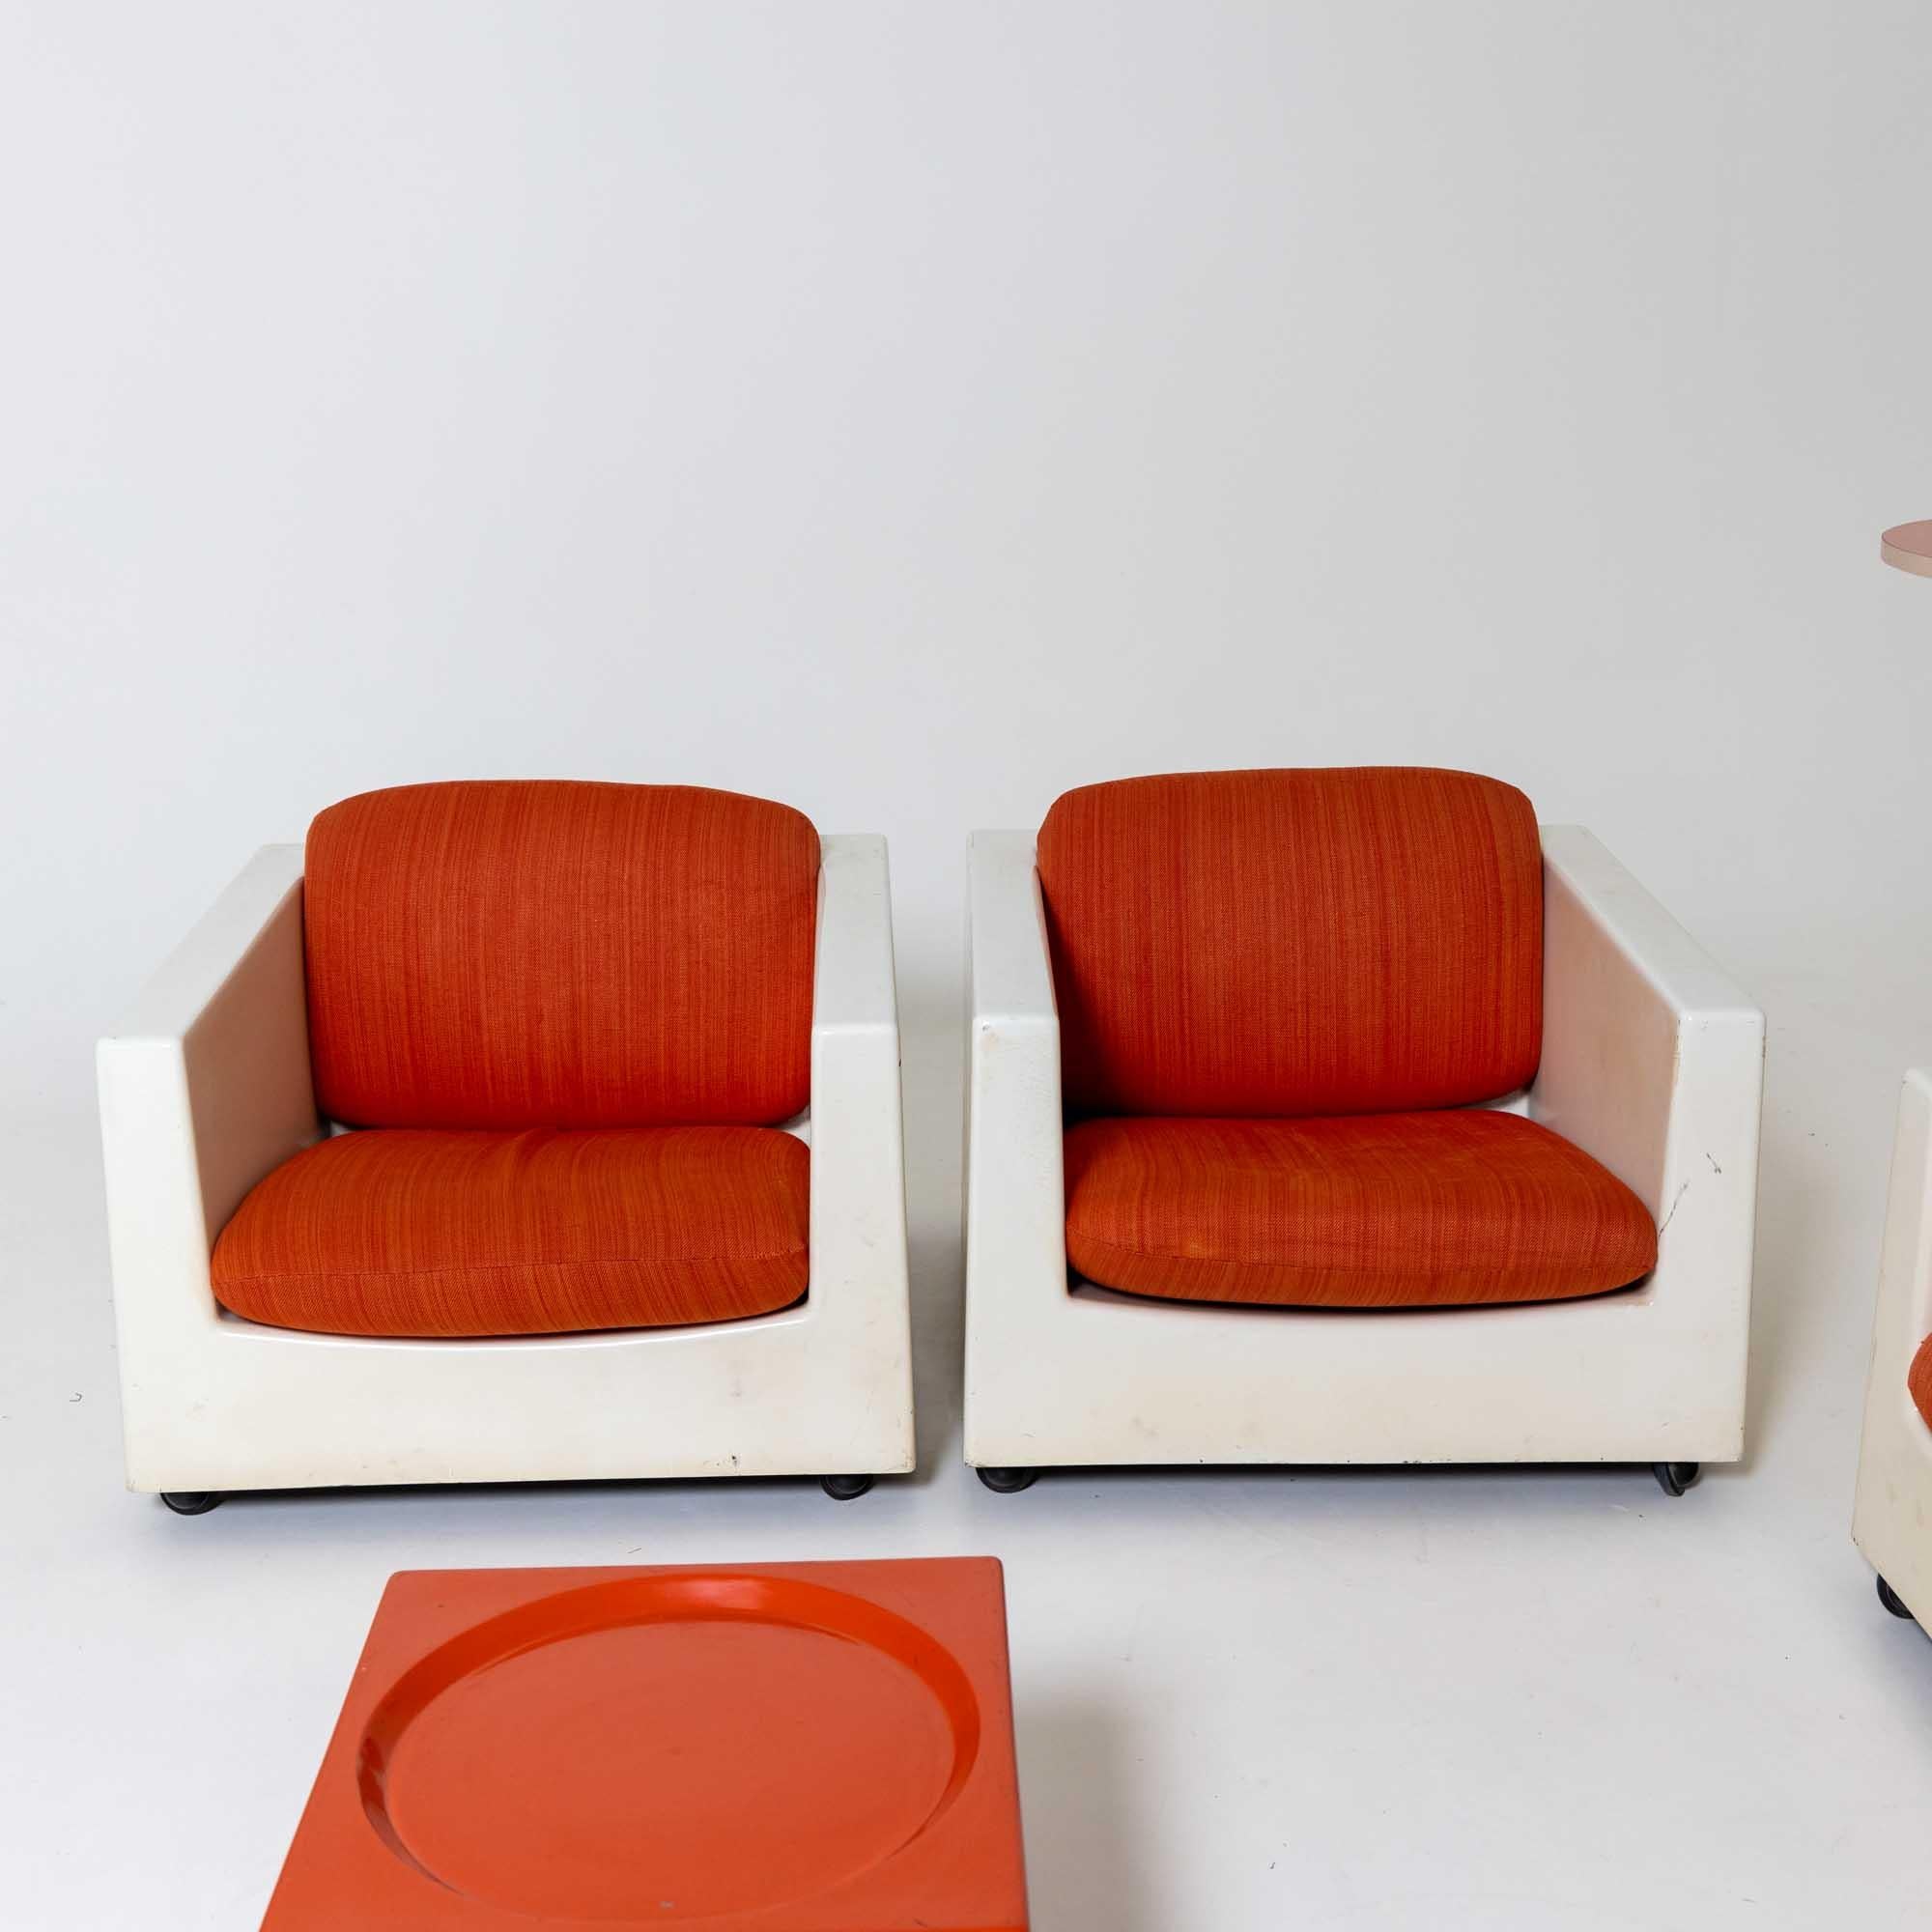 Seating group by Ico Parisi for MIM, Living Room Set, Orange, Italy 1960s For Sale 1